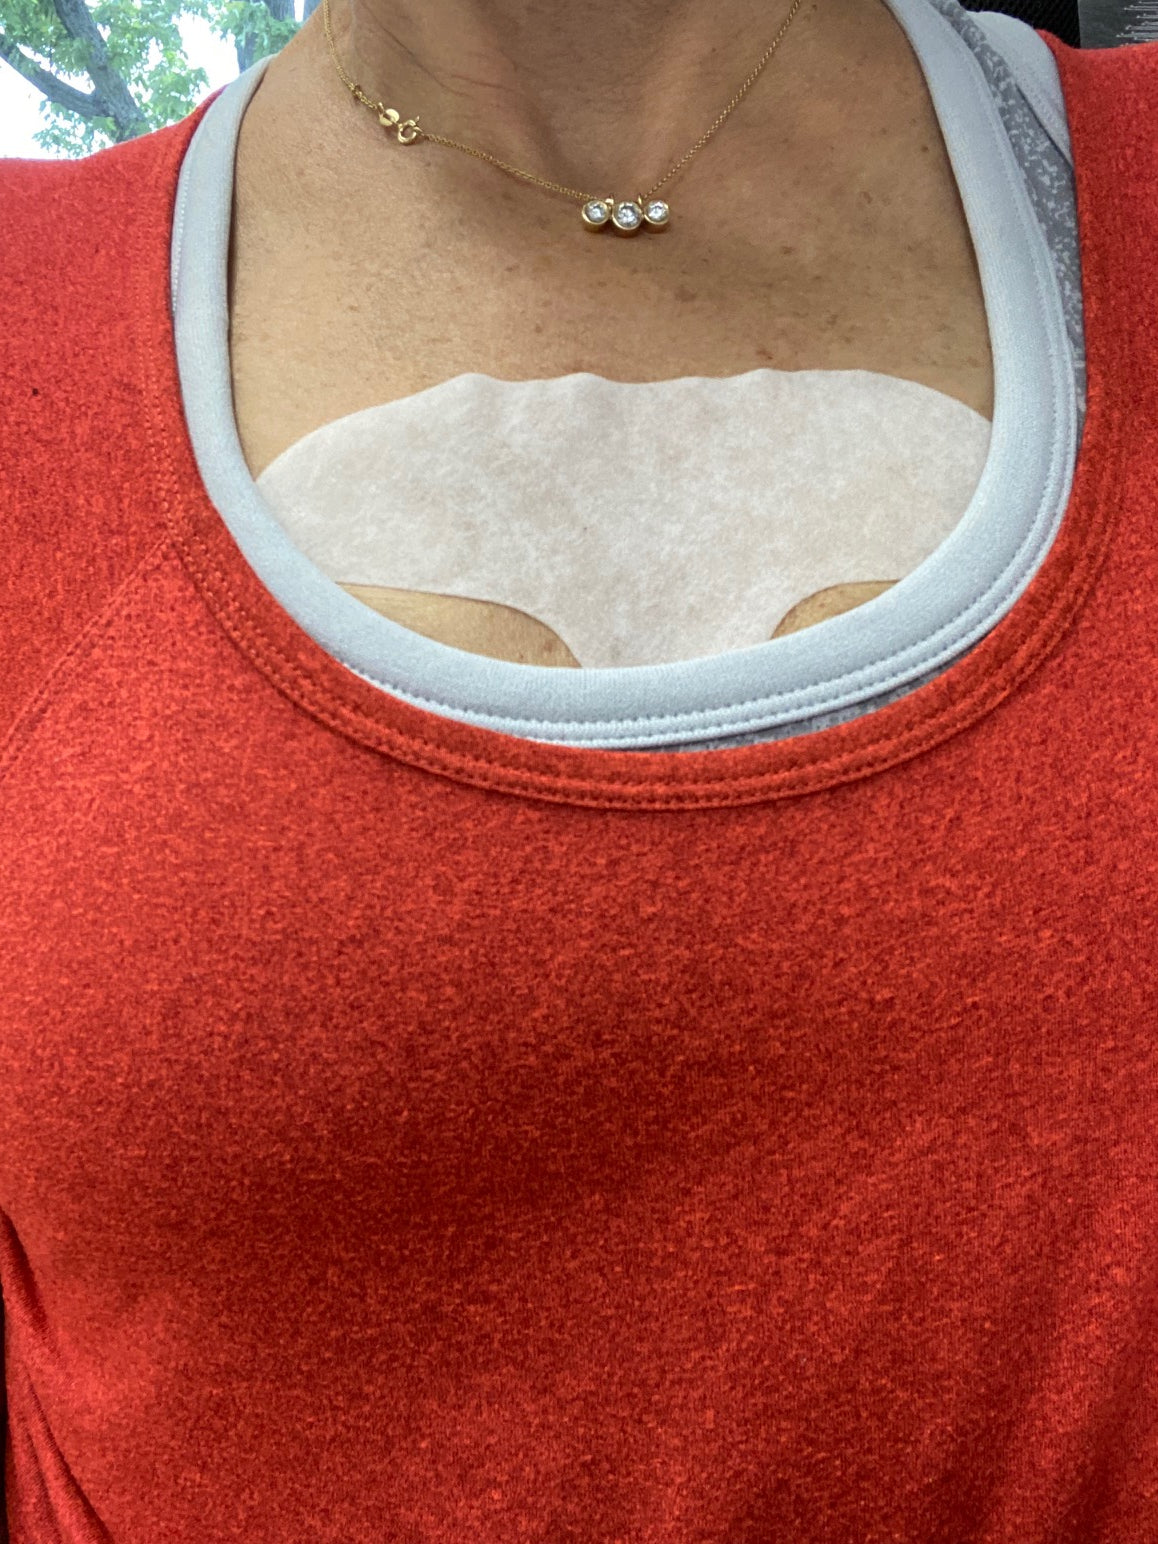 woman's chest in red top wearing Serum Patch for Forehead Wrinkles Facial Patches Frownies   